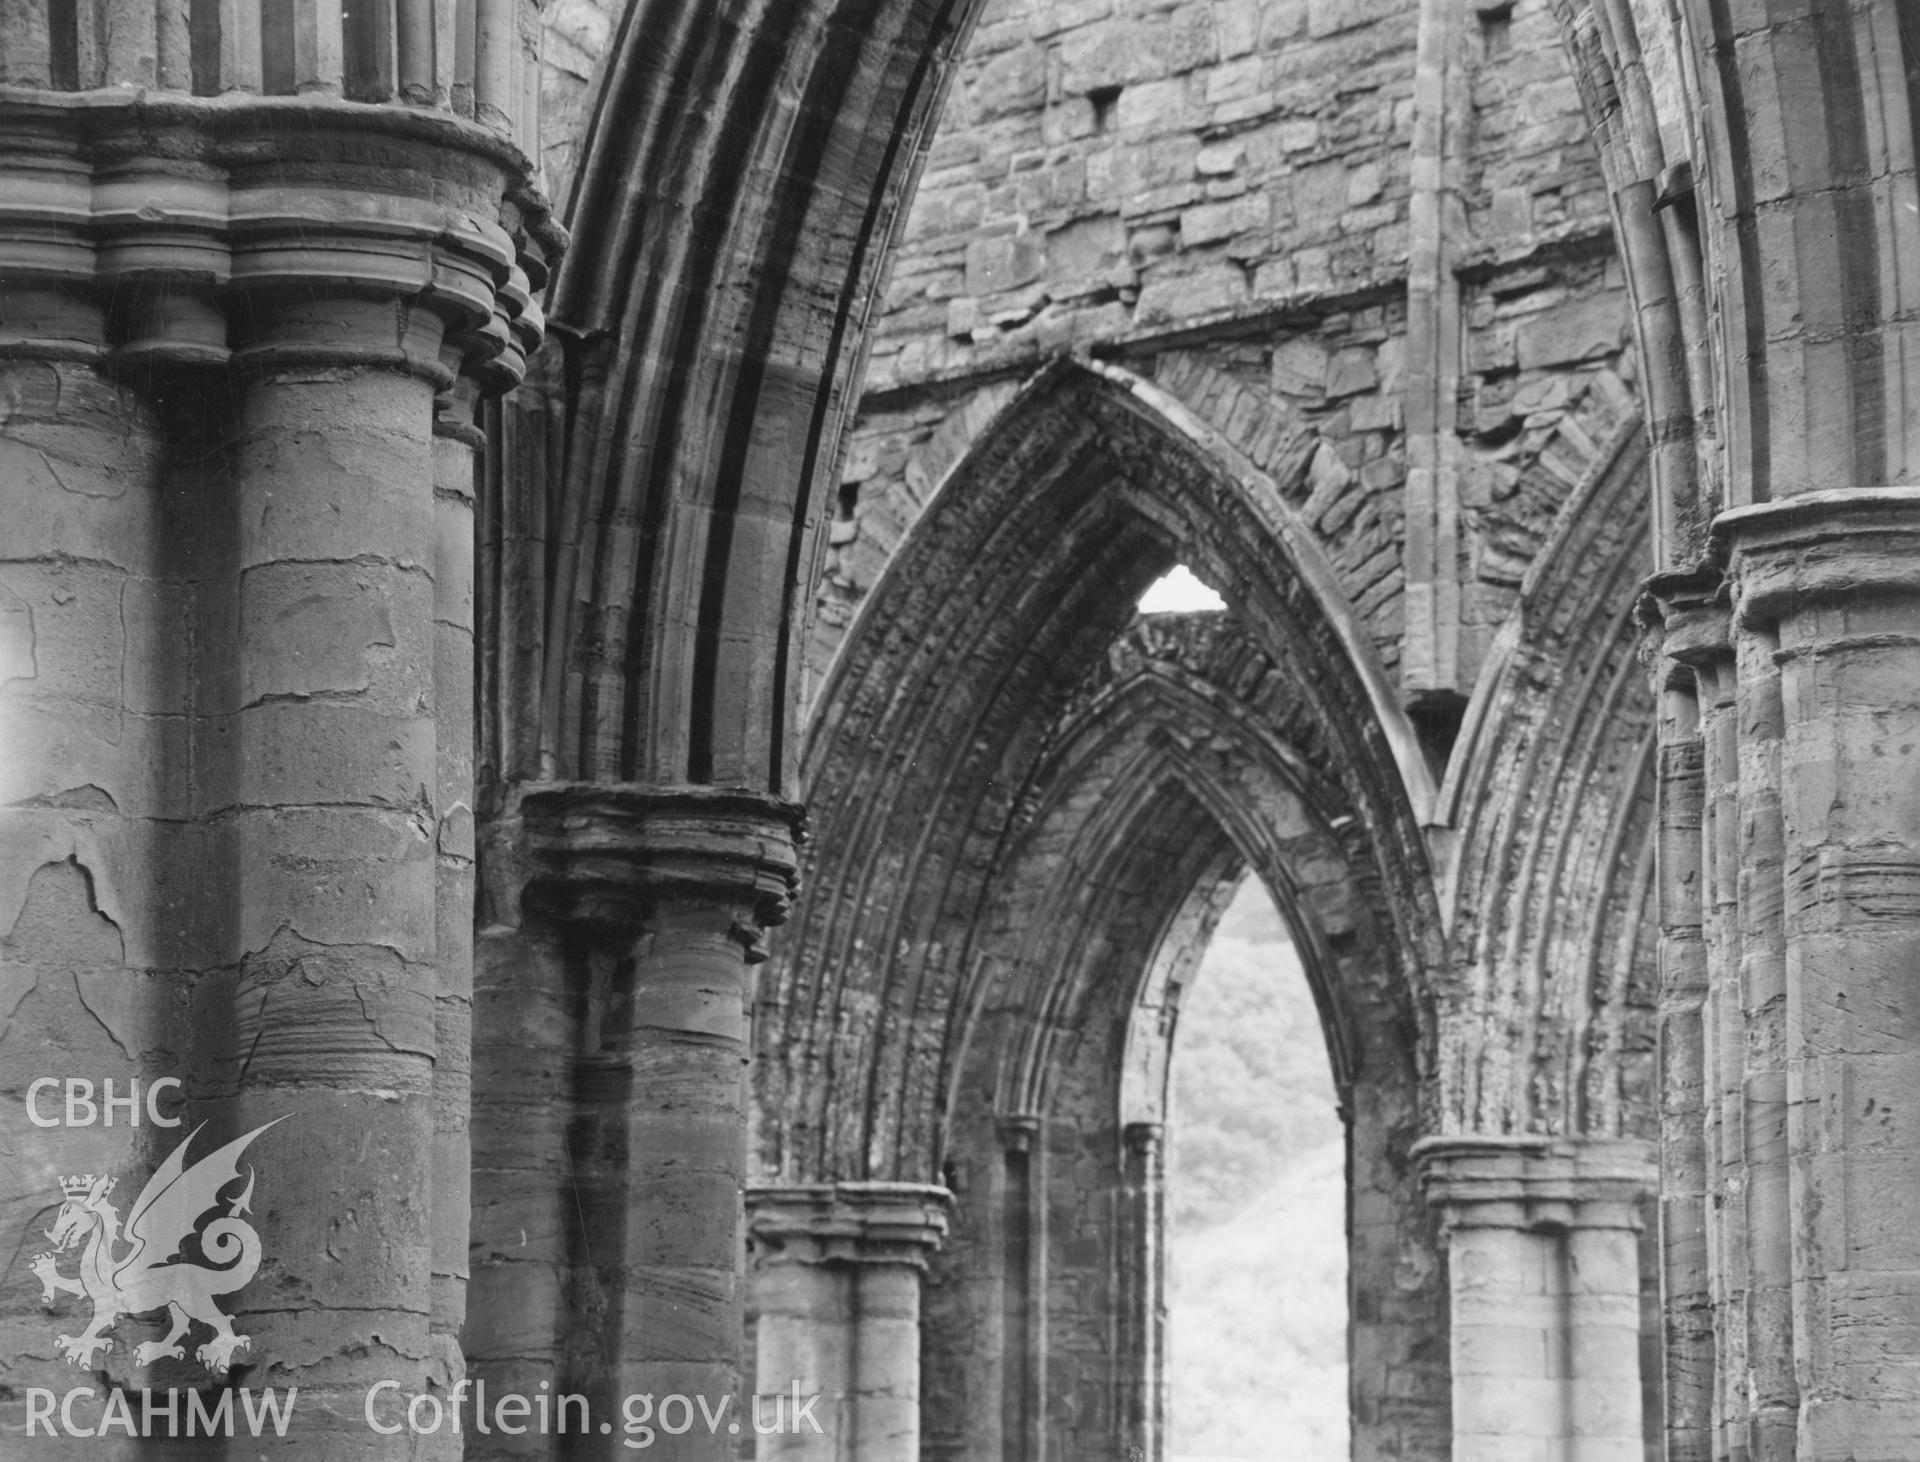 Digital copy of a view showing arch detail at Tintern Abbey taken by Shirley Jones, dated 1943.